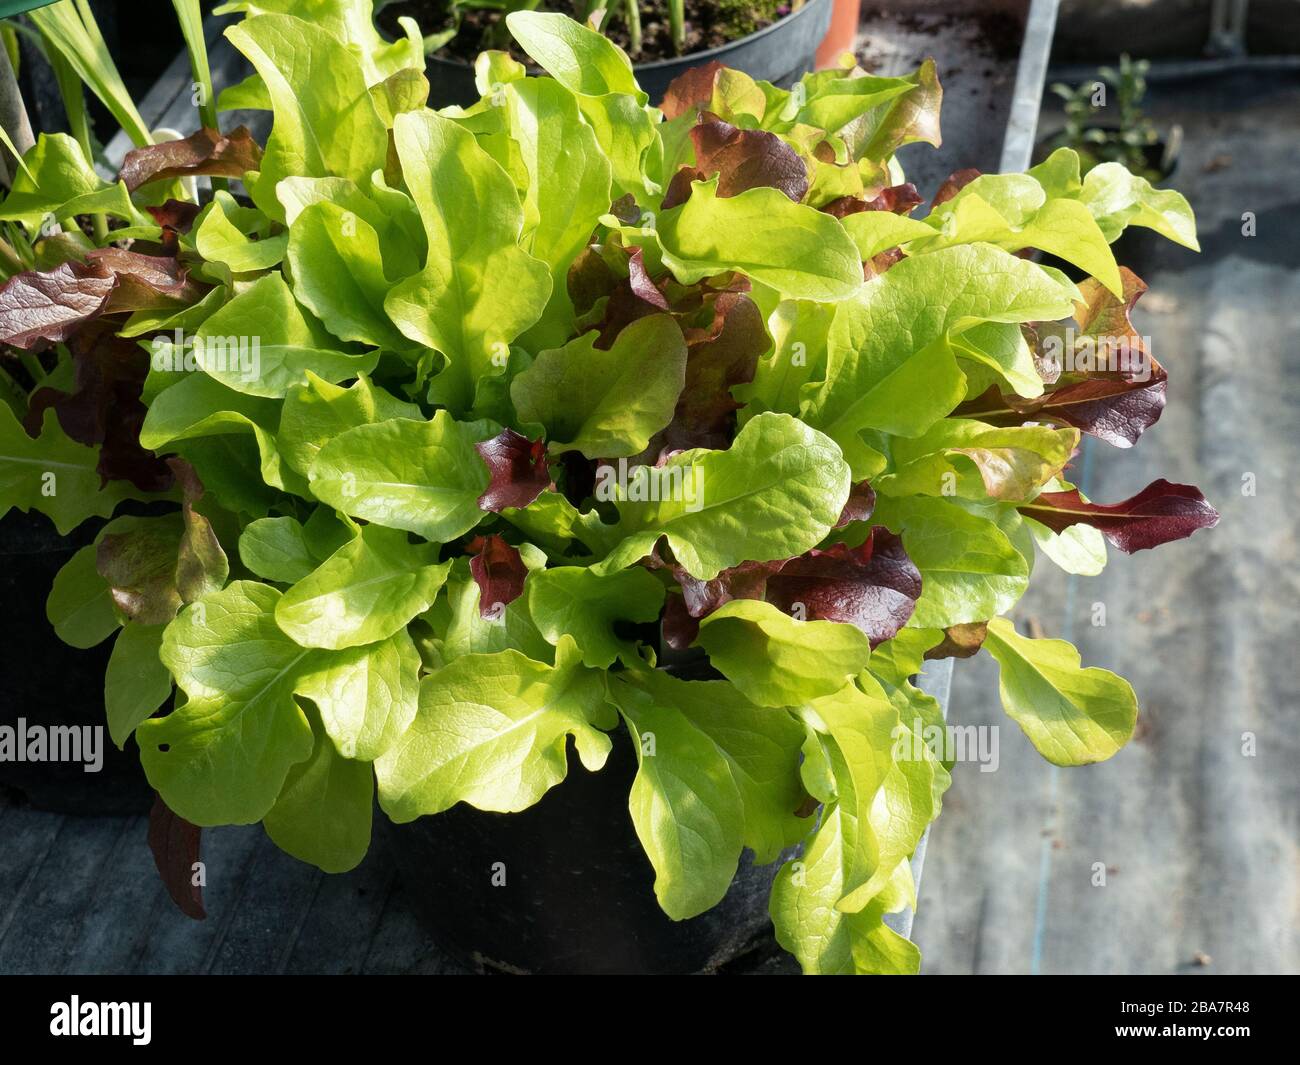 A pot full of young leaf lettuce ready to cut Stock Photo